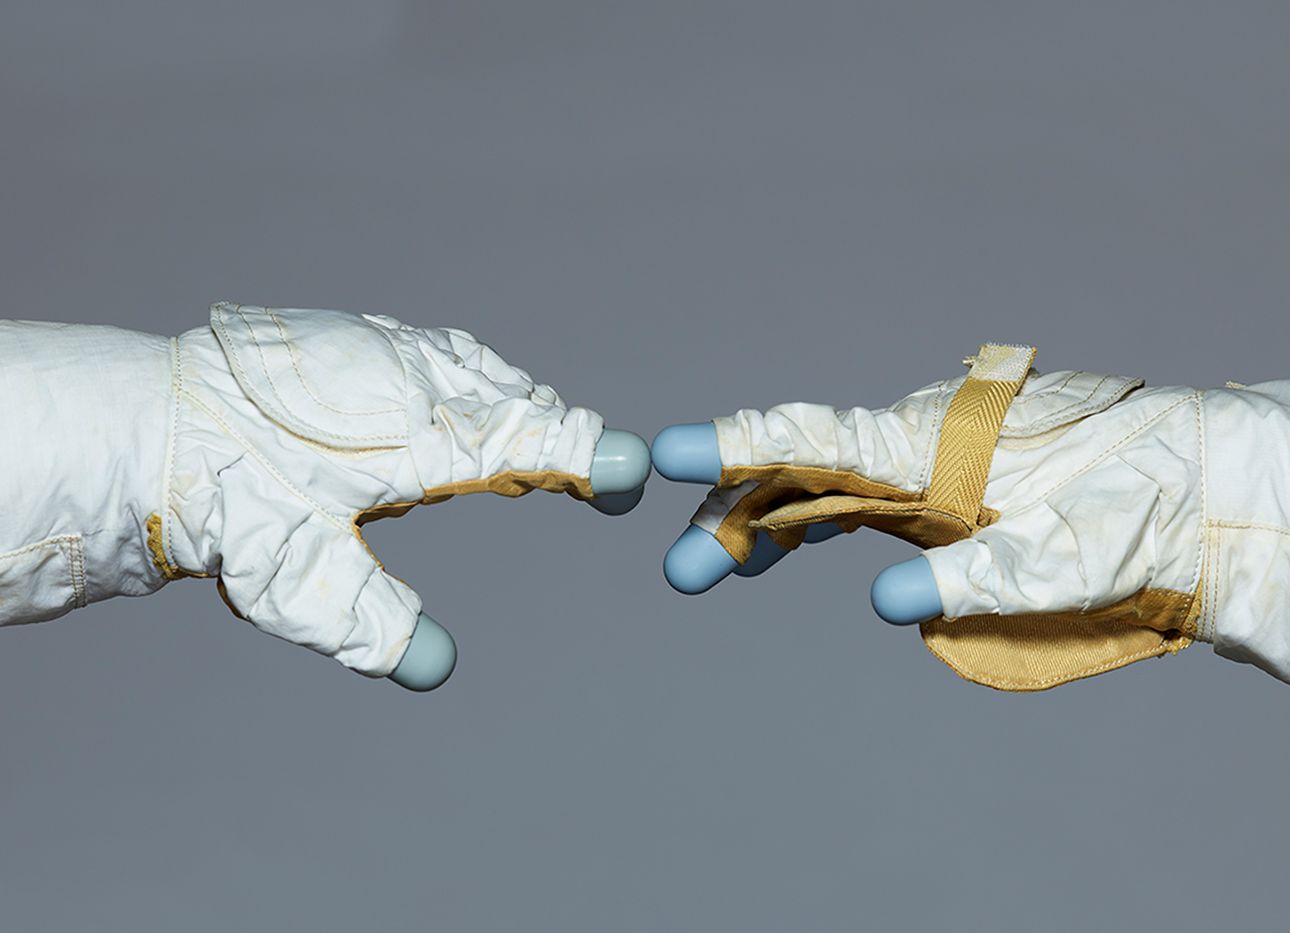 Two astronaut gloves touching on a grey background.